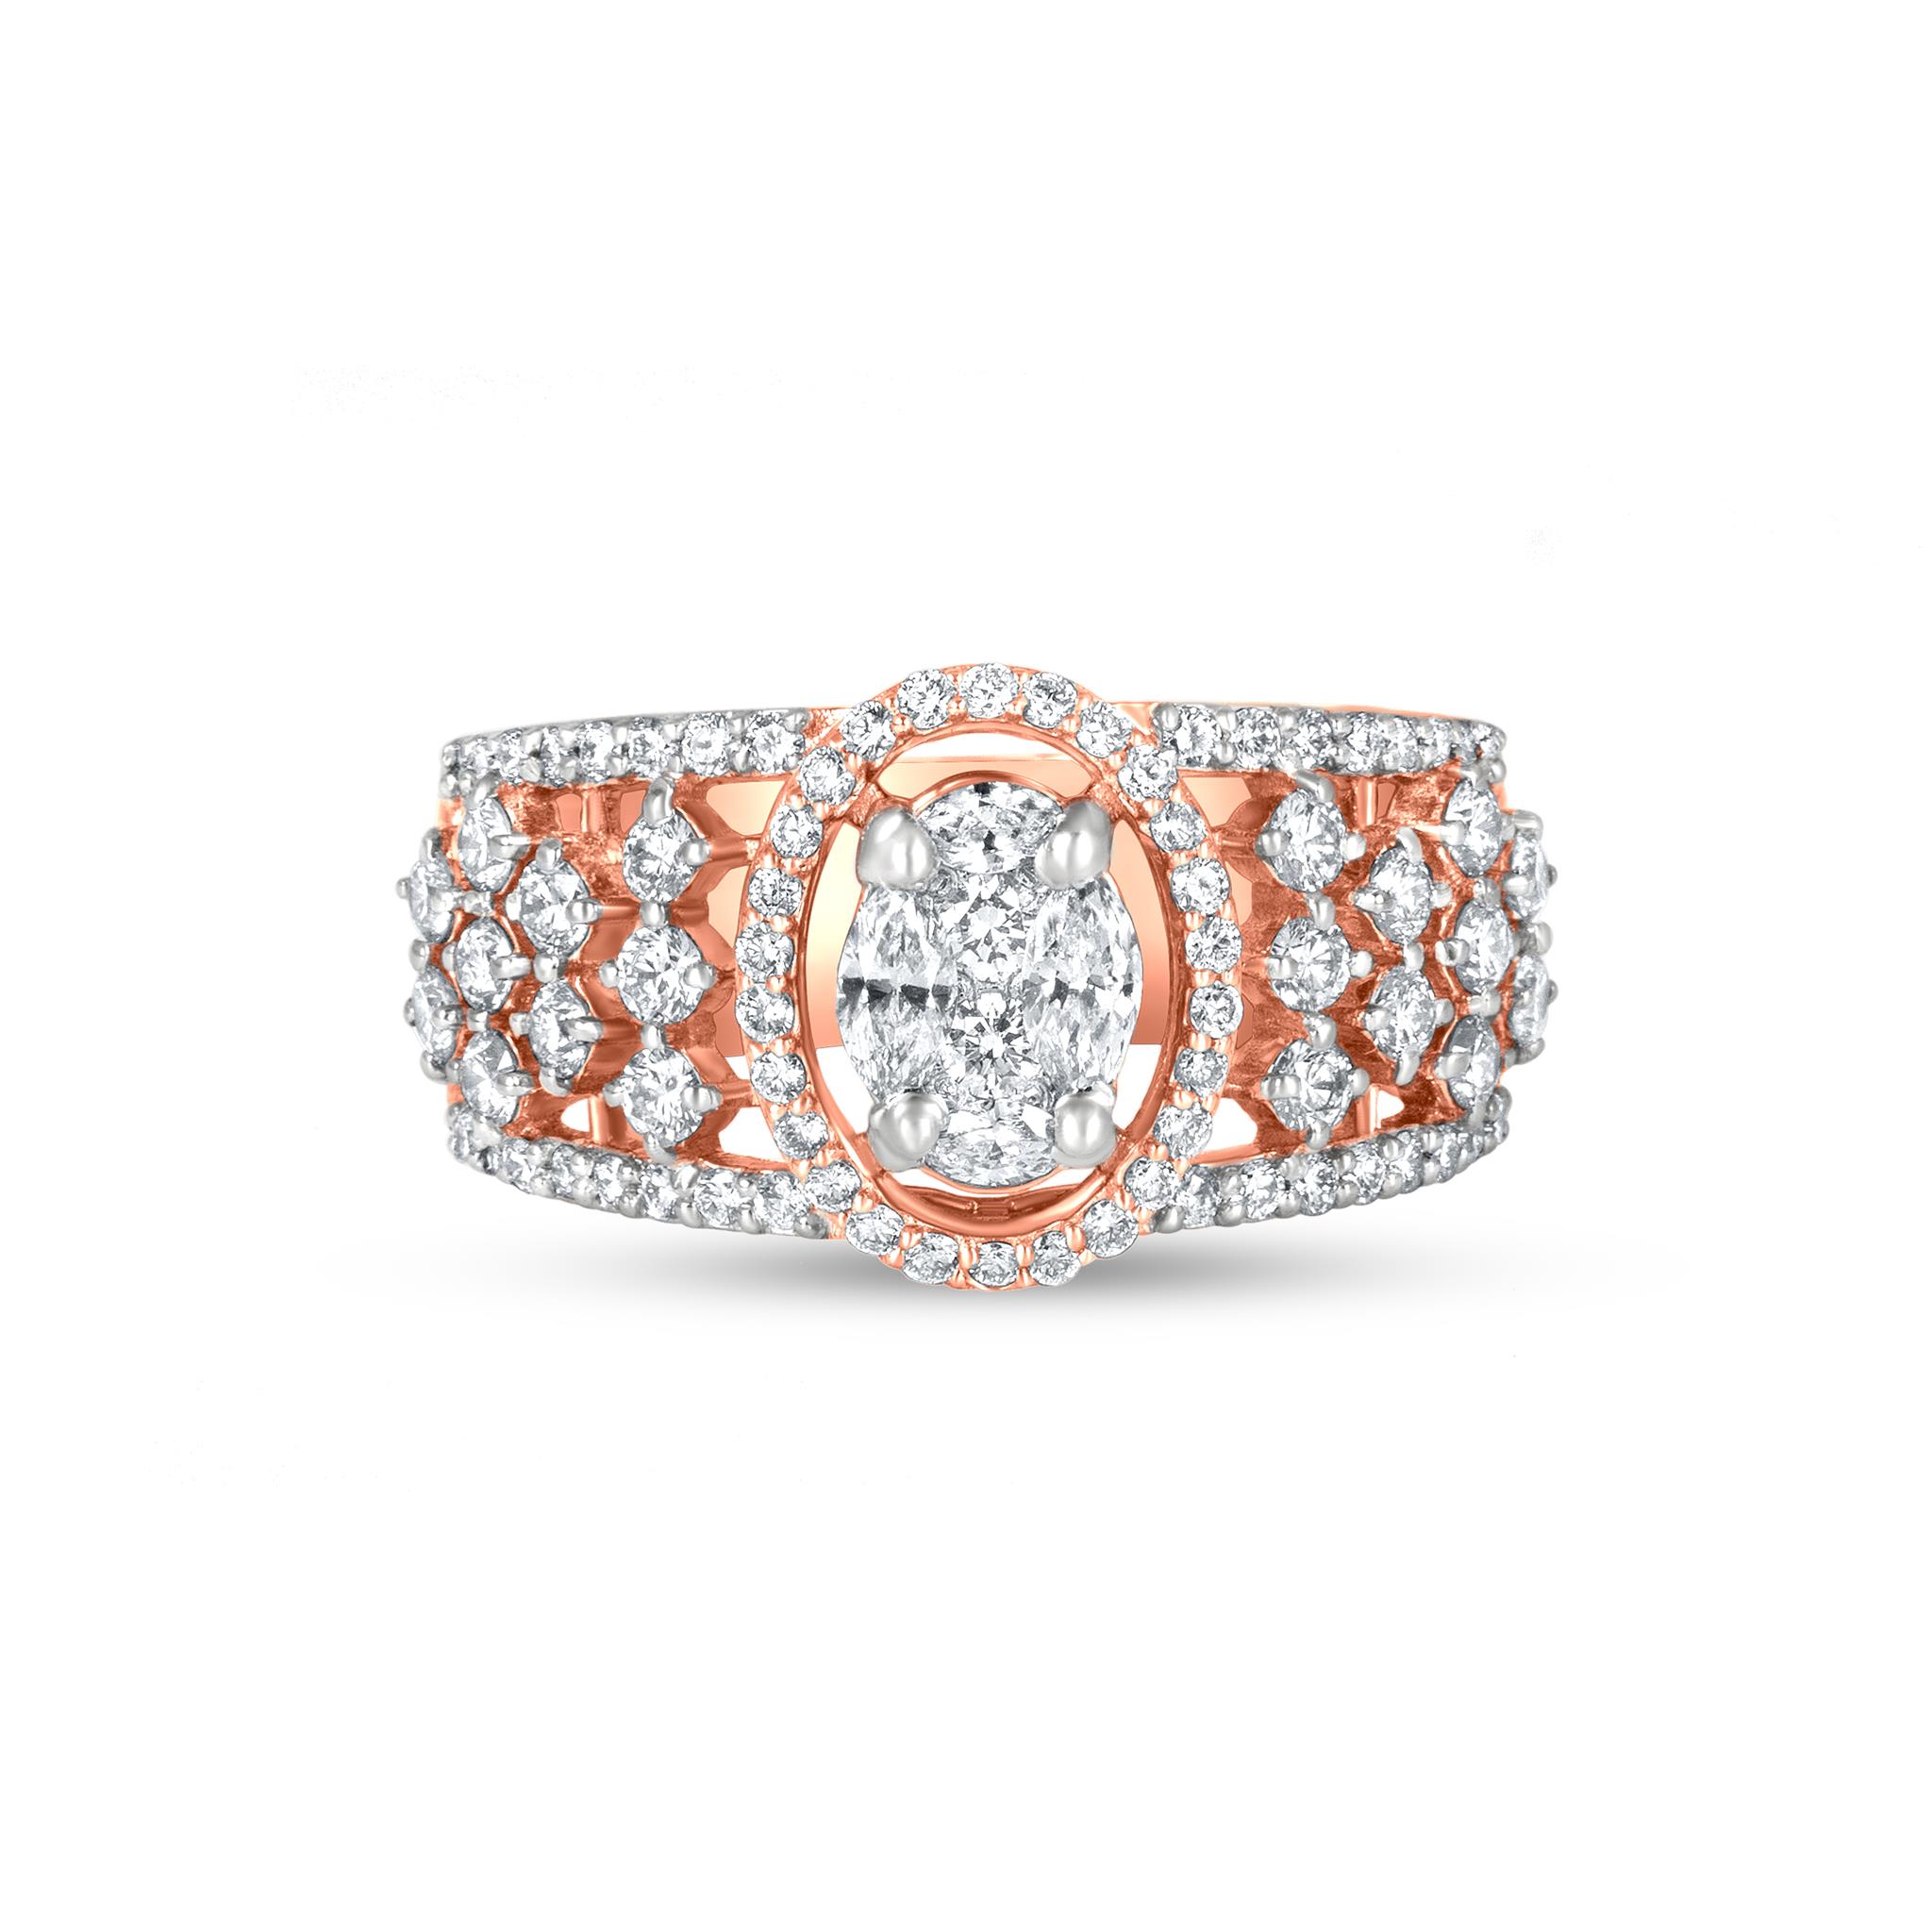 Rose Gold Solitaire Diamond Engagement Ring with Halo | Birks